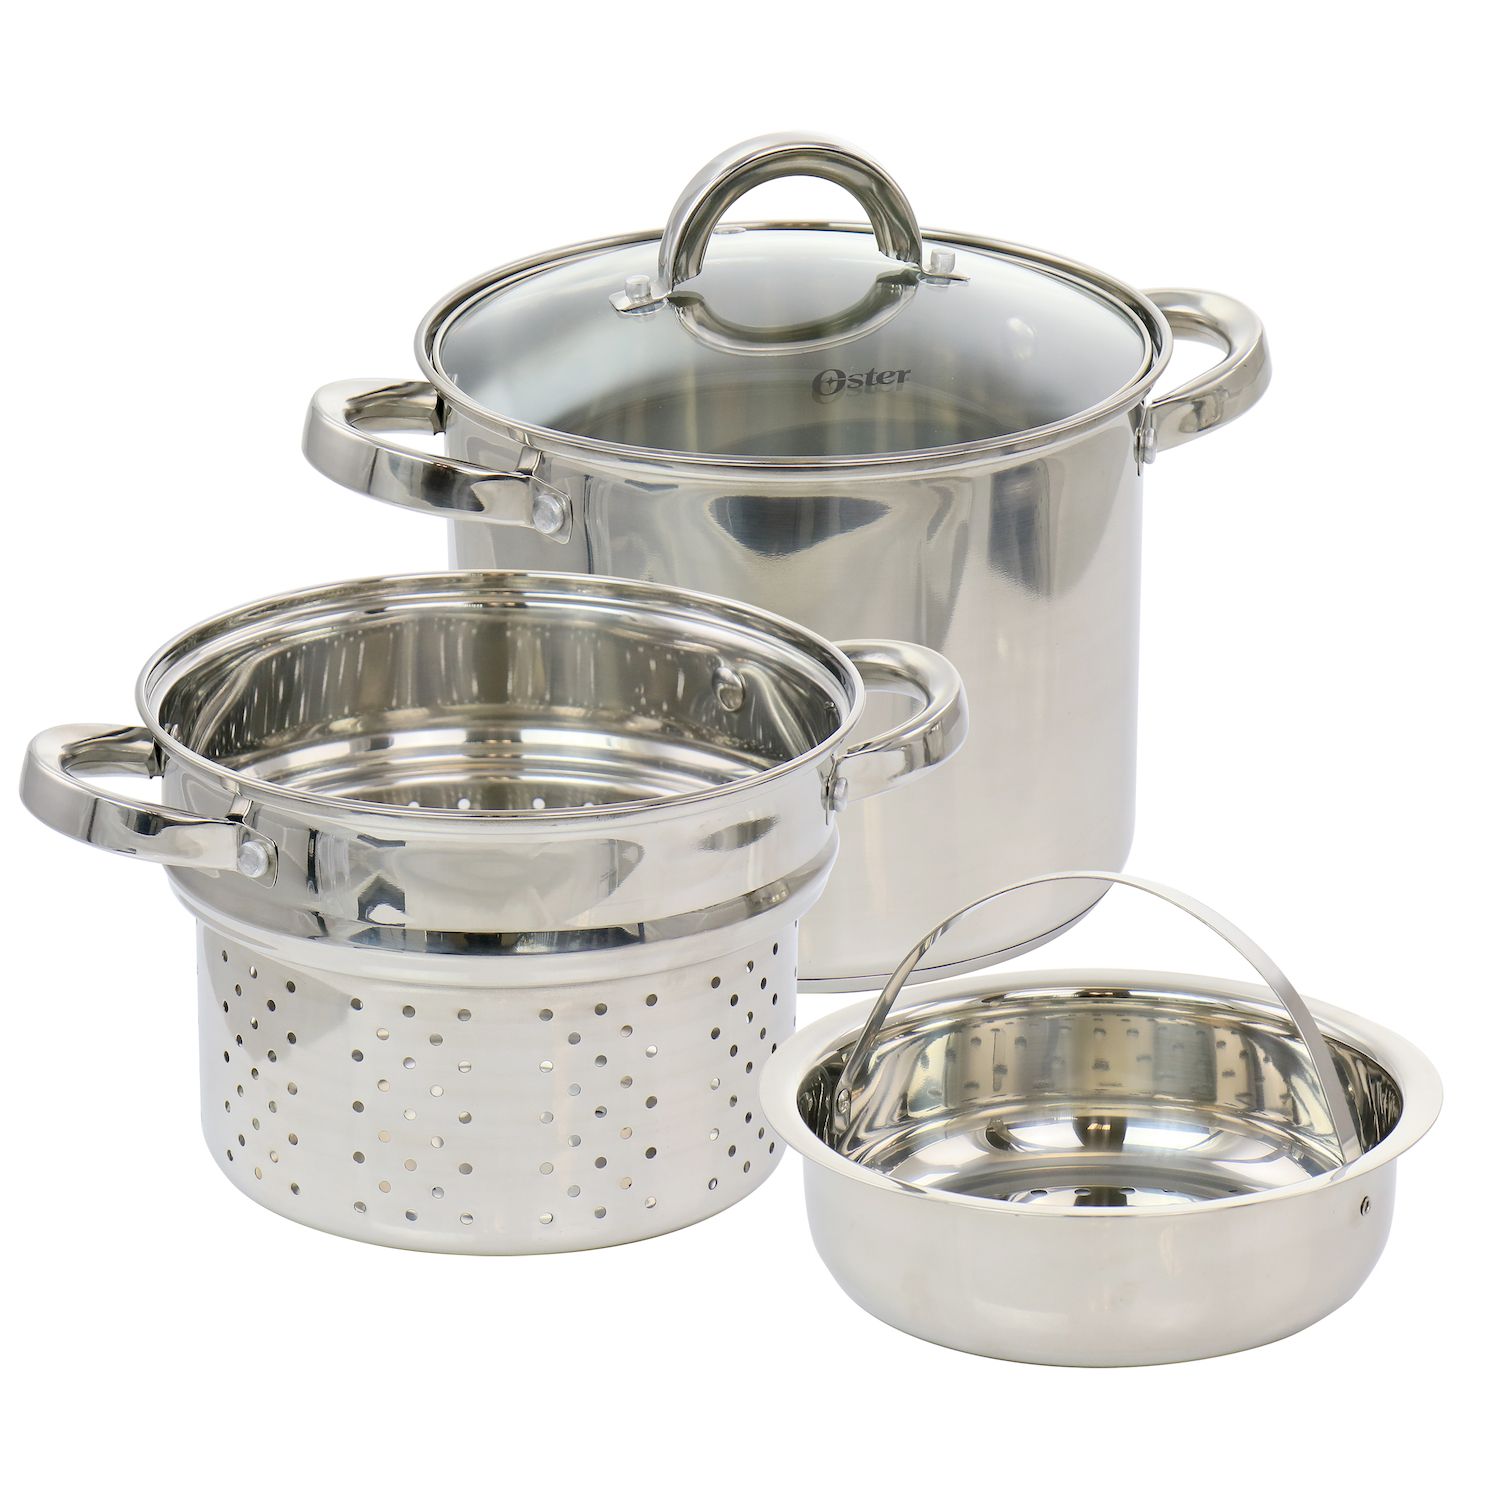 5 Qt Stainless Steel Steamer Set - Tramontina US